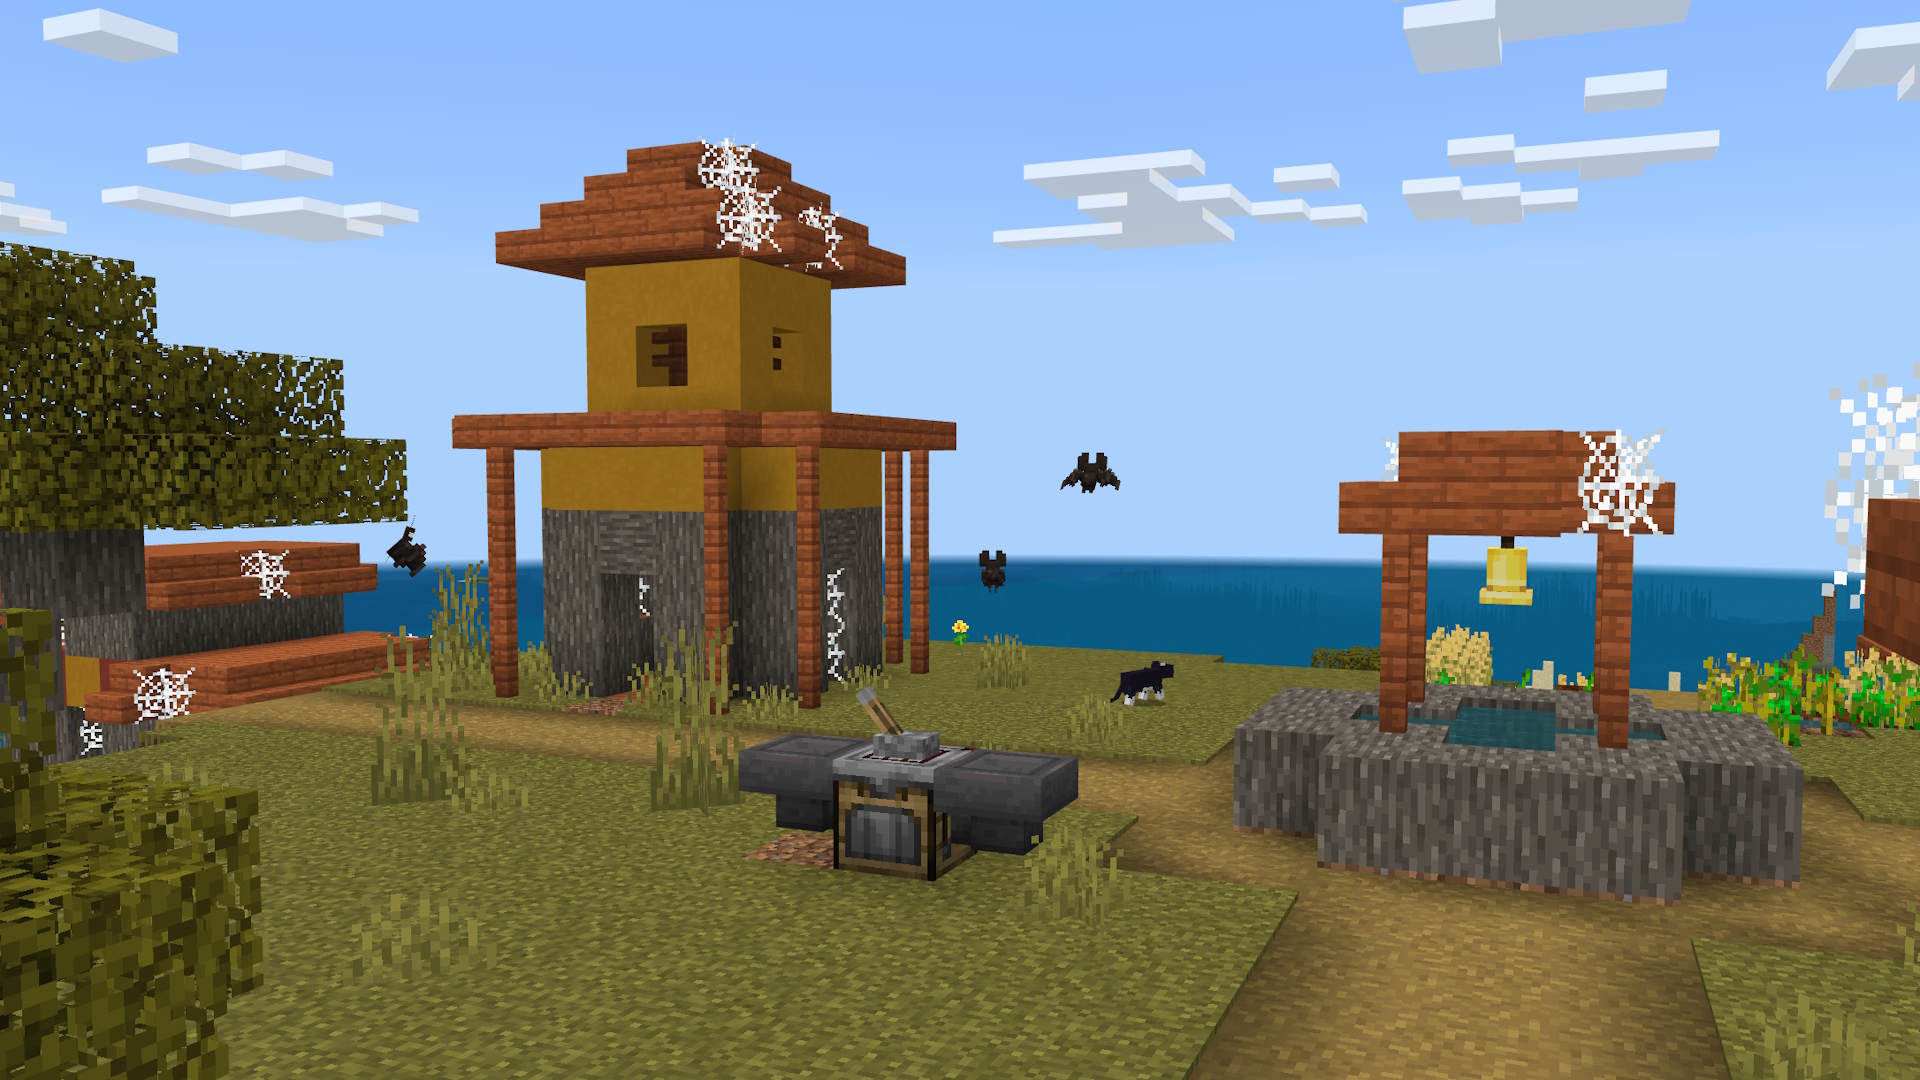 A Minecraft screenshot of am abandoned village. There are bats flying around, and there's a crafter in the scene.